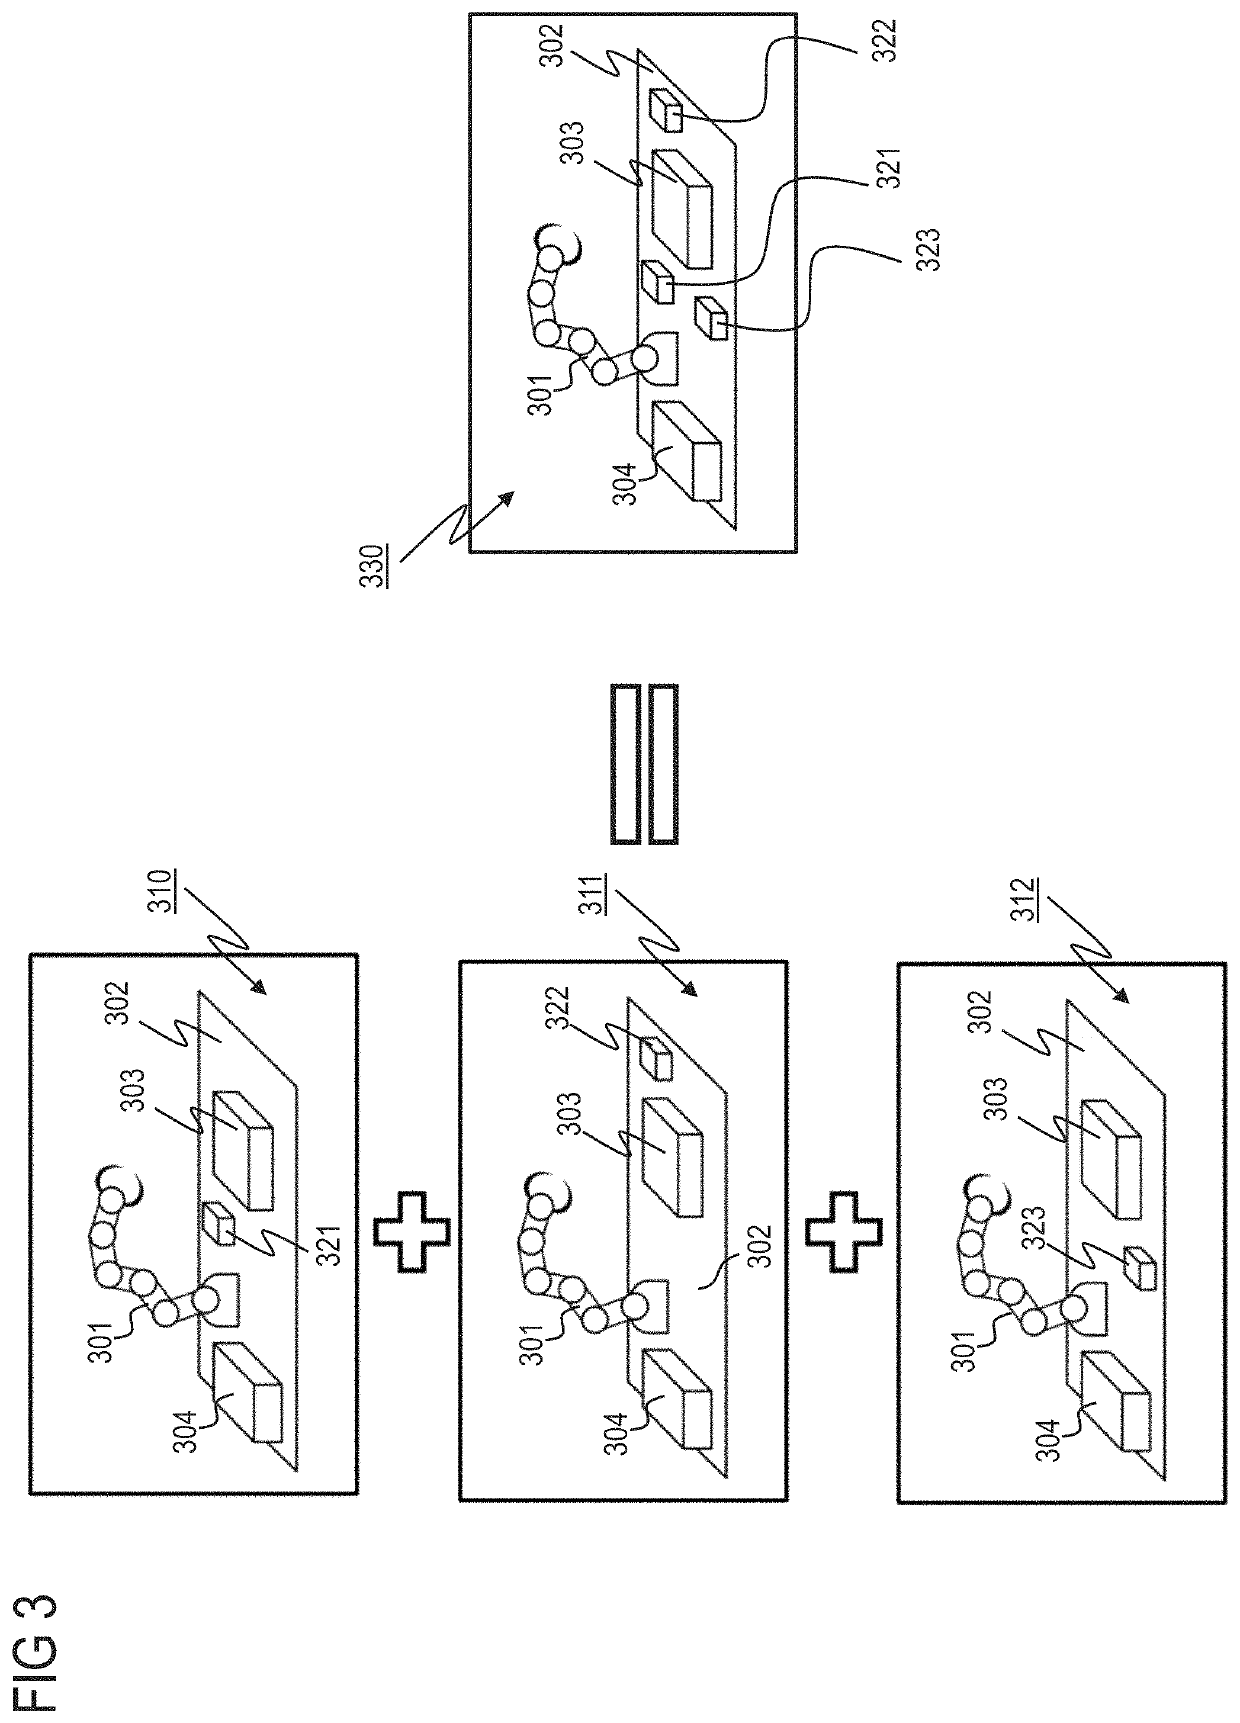 Method and system for programming a cobot for a plurality of industrial cells